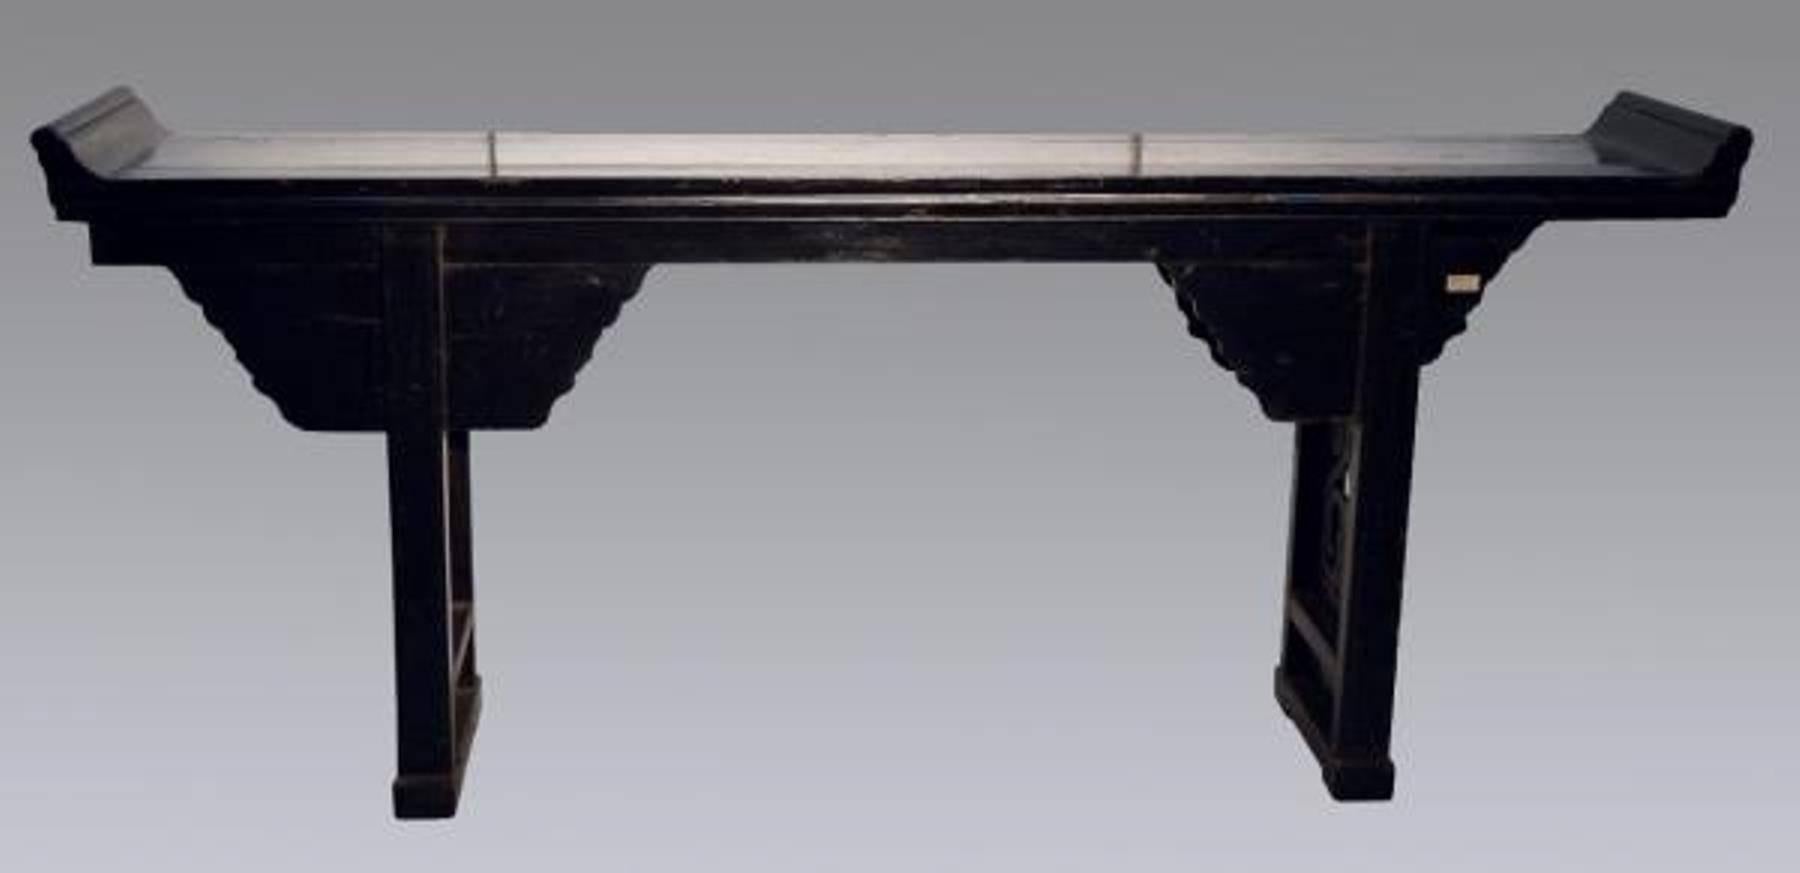 A black lacquered Chinese console table from the 19th century. This console table originally an altar table features black lacquer and a variety of carved details. This large console table showcases an elegant shape with rounded edges on the sides